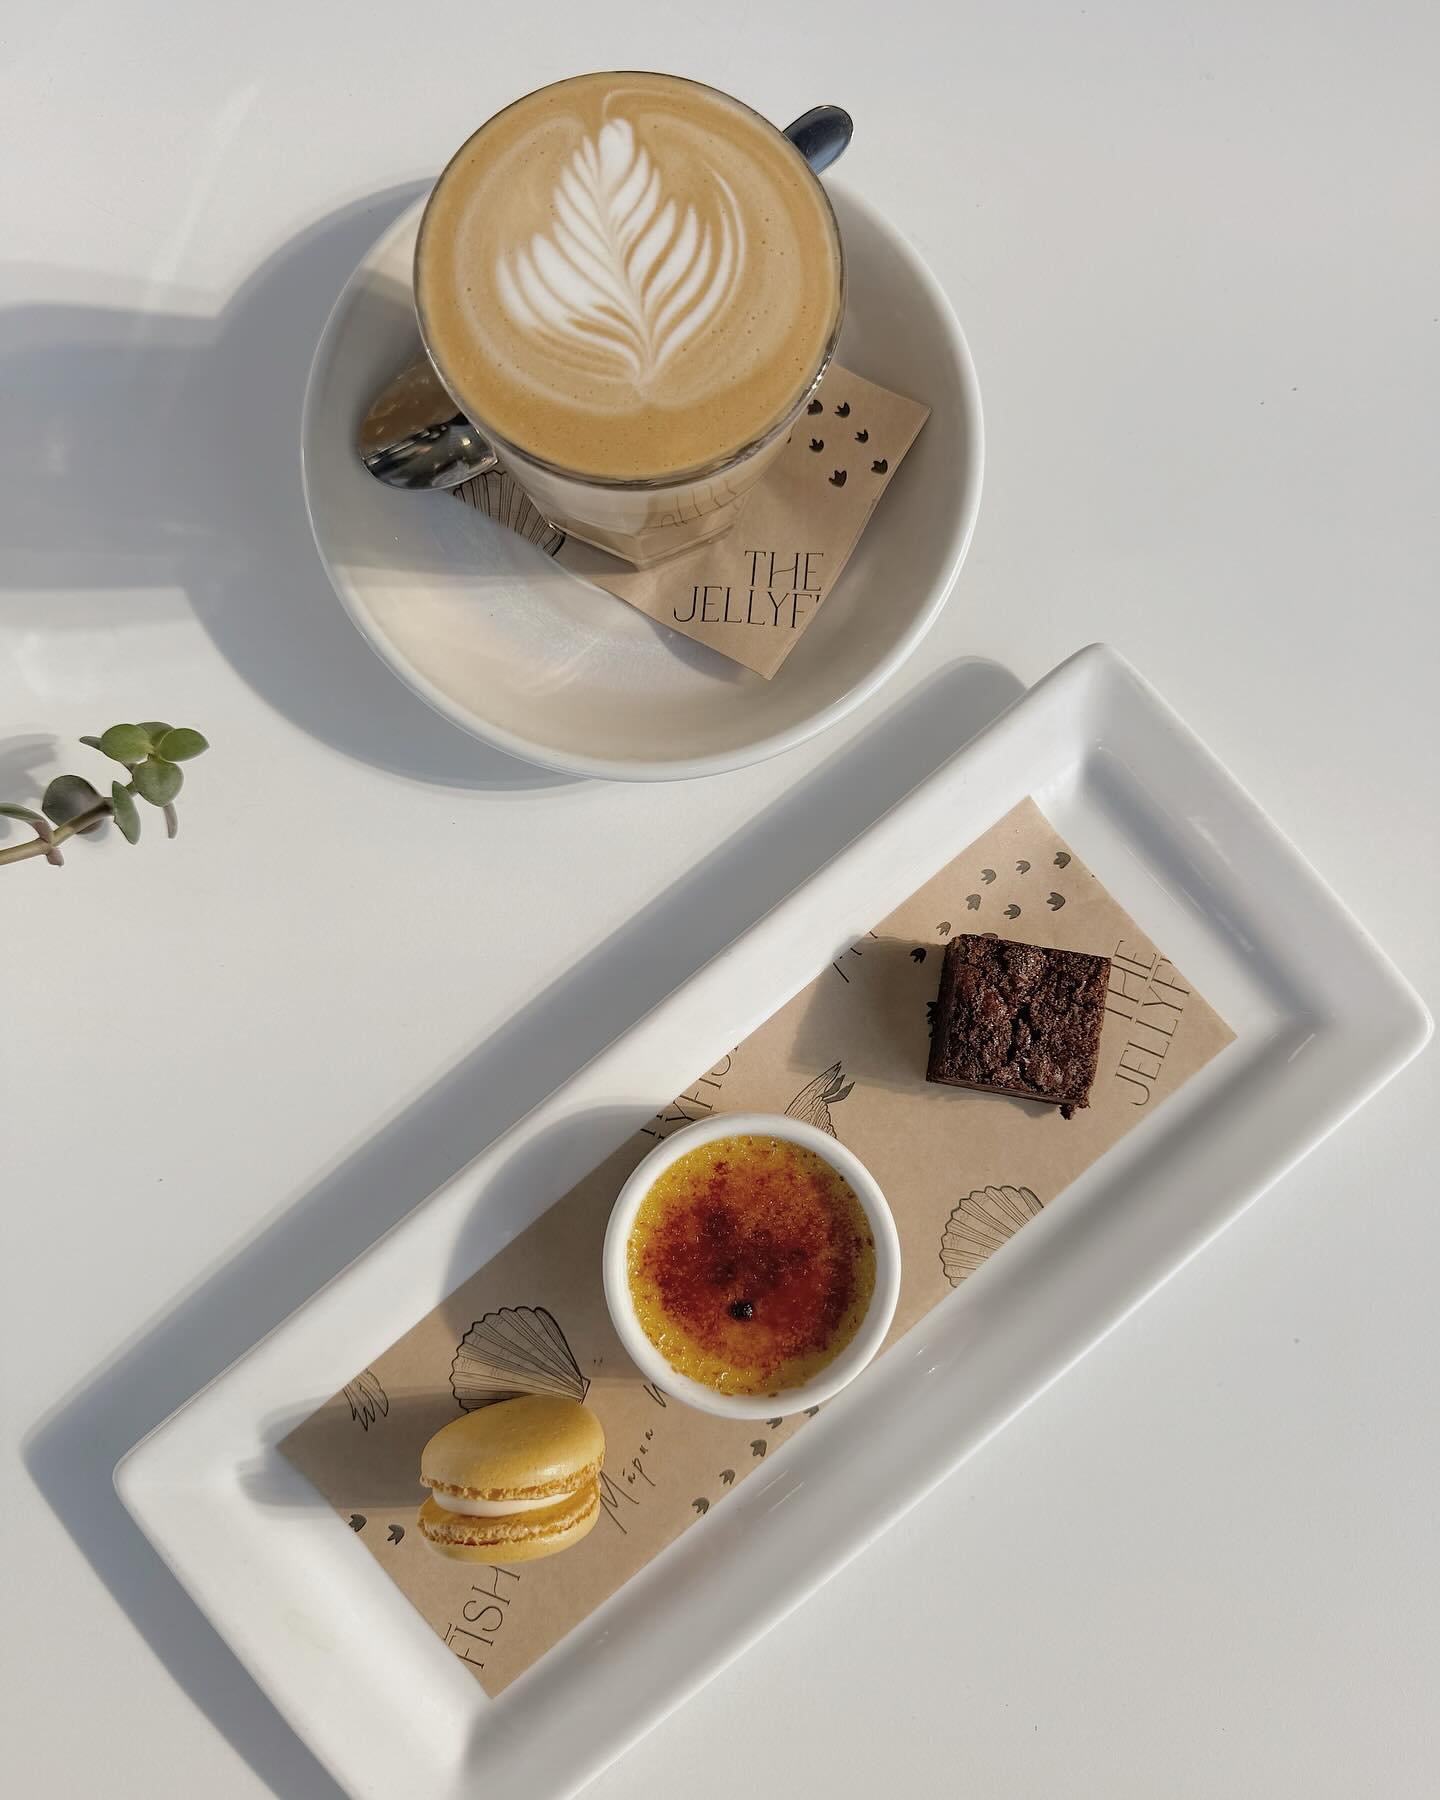 Happy Mother&rsquo;s Day to all ✨ Today, let&rsquo;s celebrate the amazing Mum&rsquo;s in our lives!

Featuring our cafe gourmand - 3 sweet treats, served with a coffee of your choice 🍮